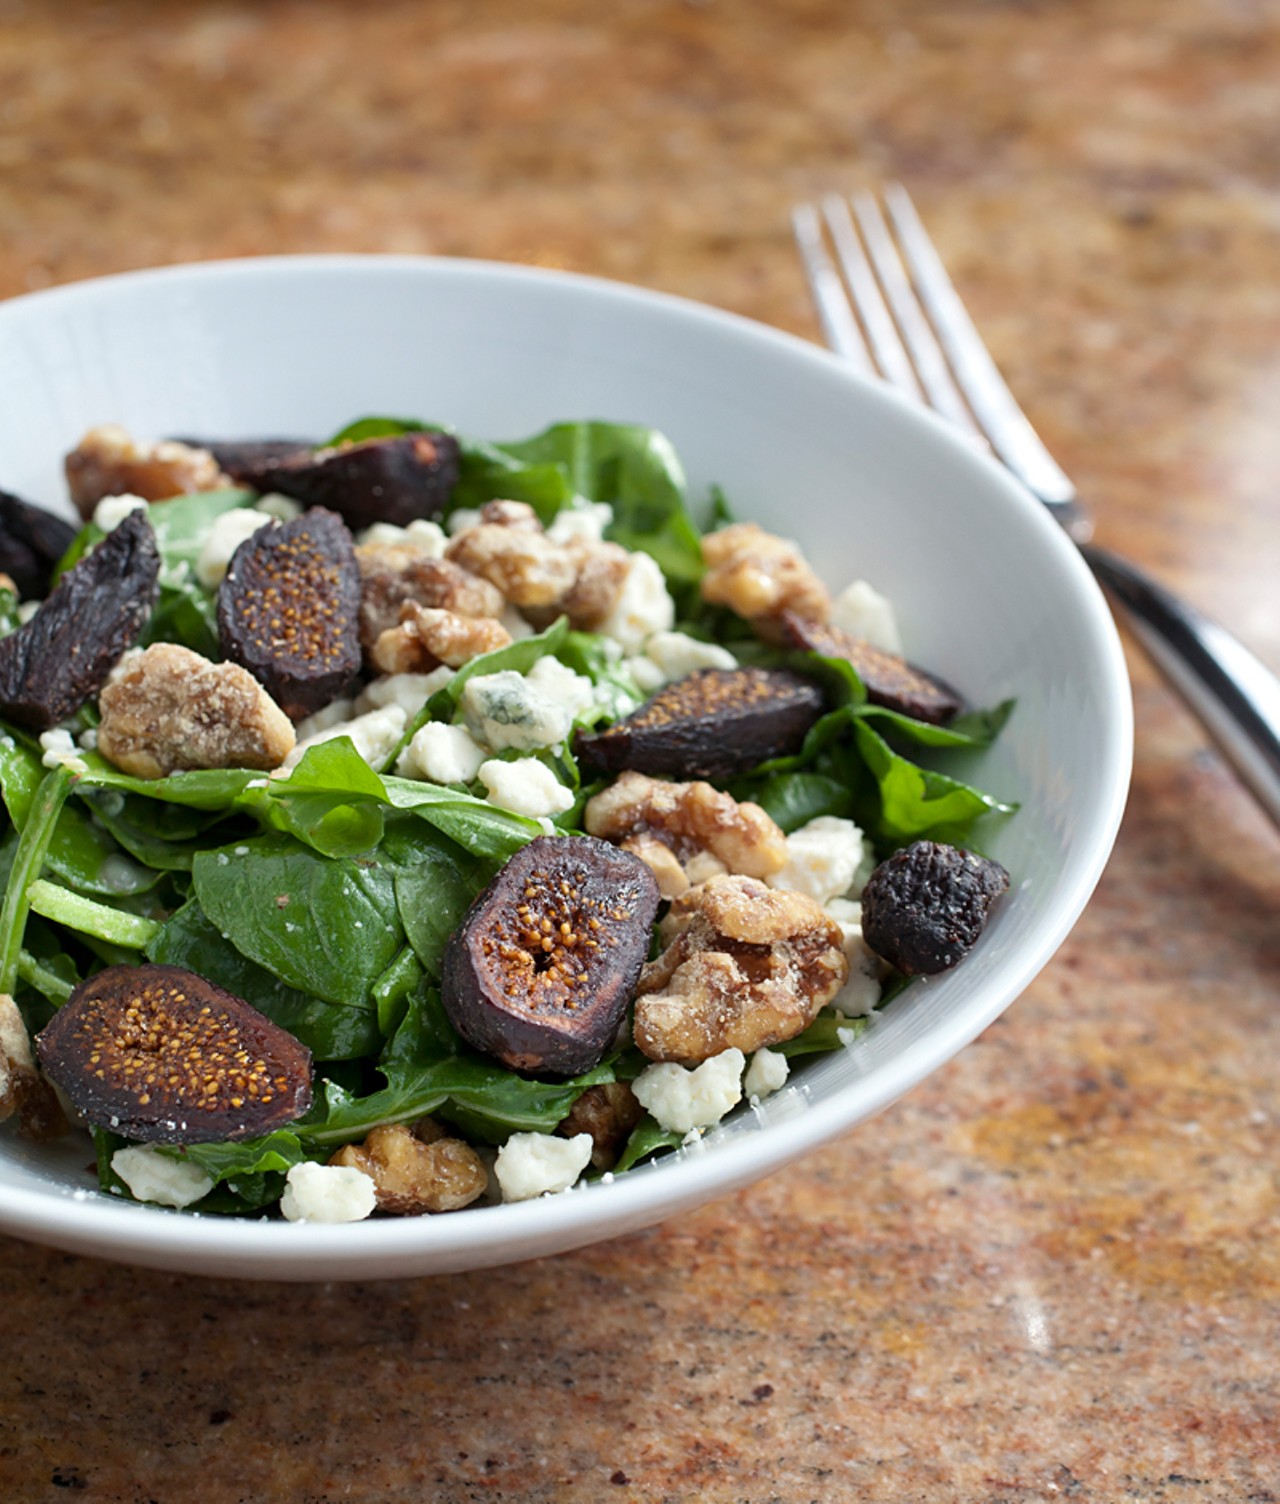 Spinach and arugula salad with figs, gorgonzola dolce, candied walnuts and sweet fennel vinaigrette.